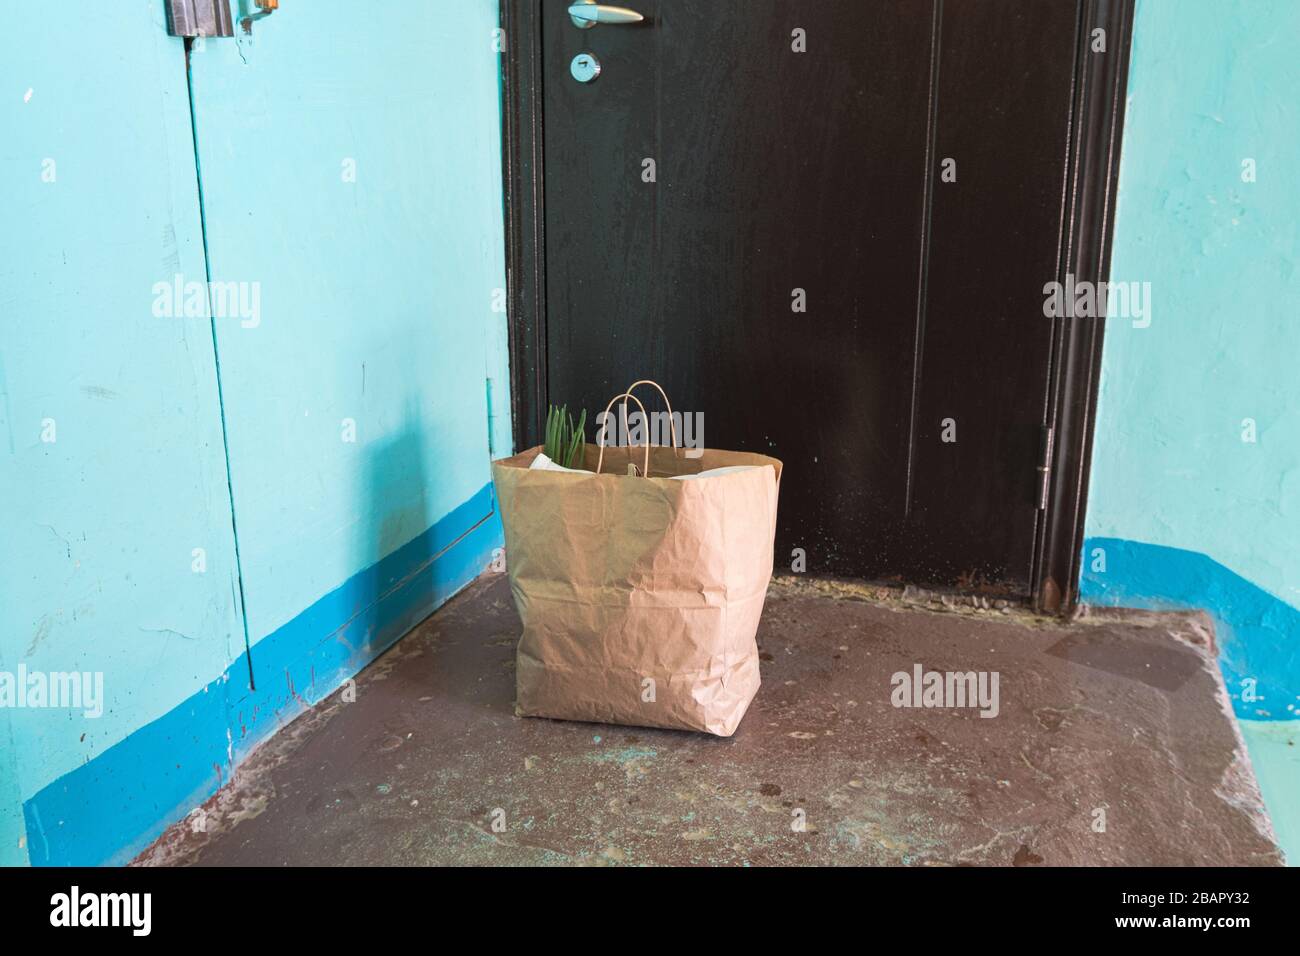 Delivery during quarantine. Self-isolation. Social Services. A paper bag with goods and food in front of the door, the concept of neighborhood Quarant Stock Photo